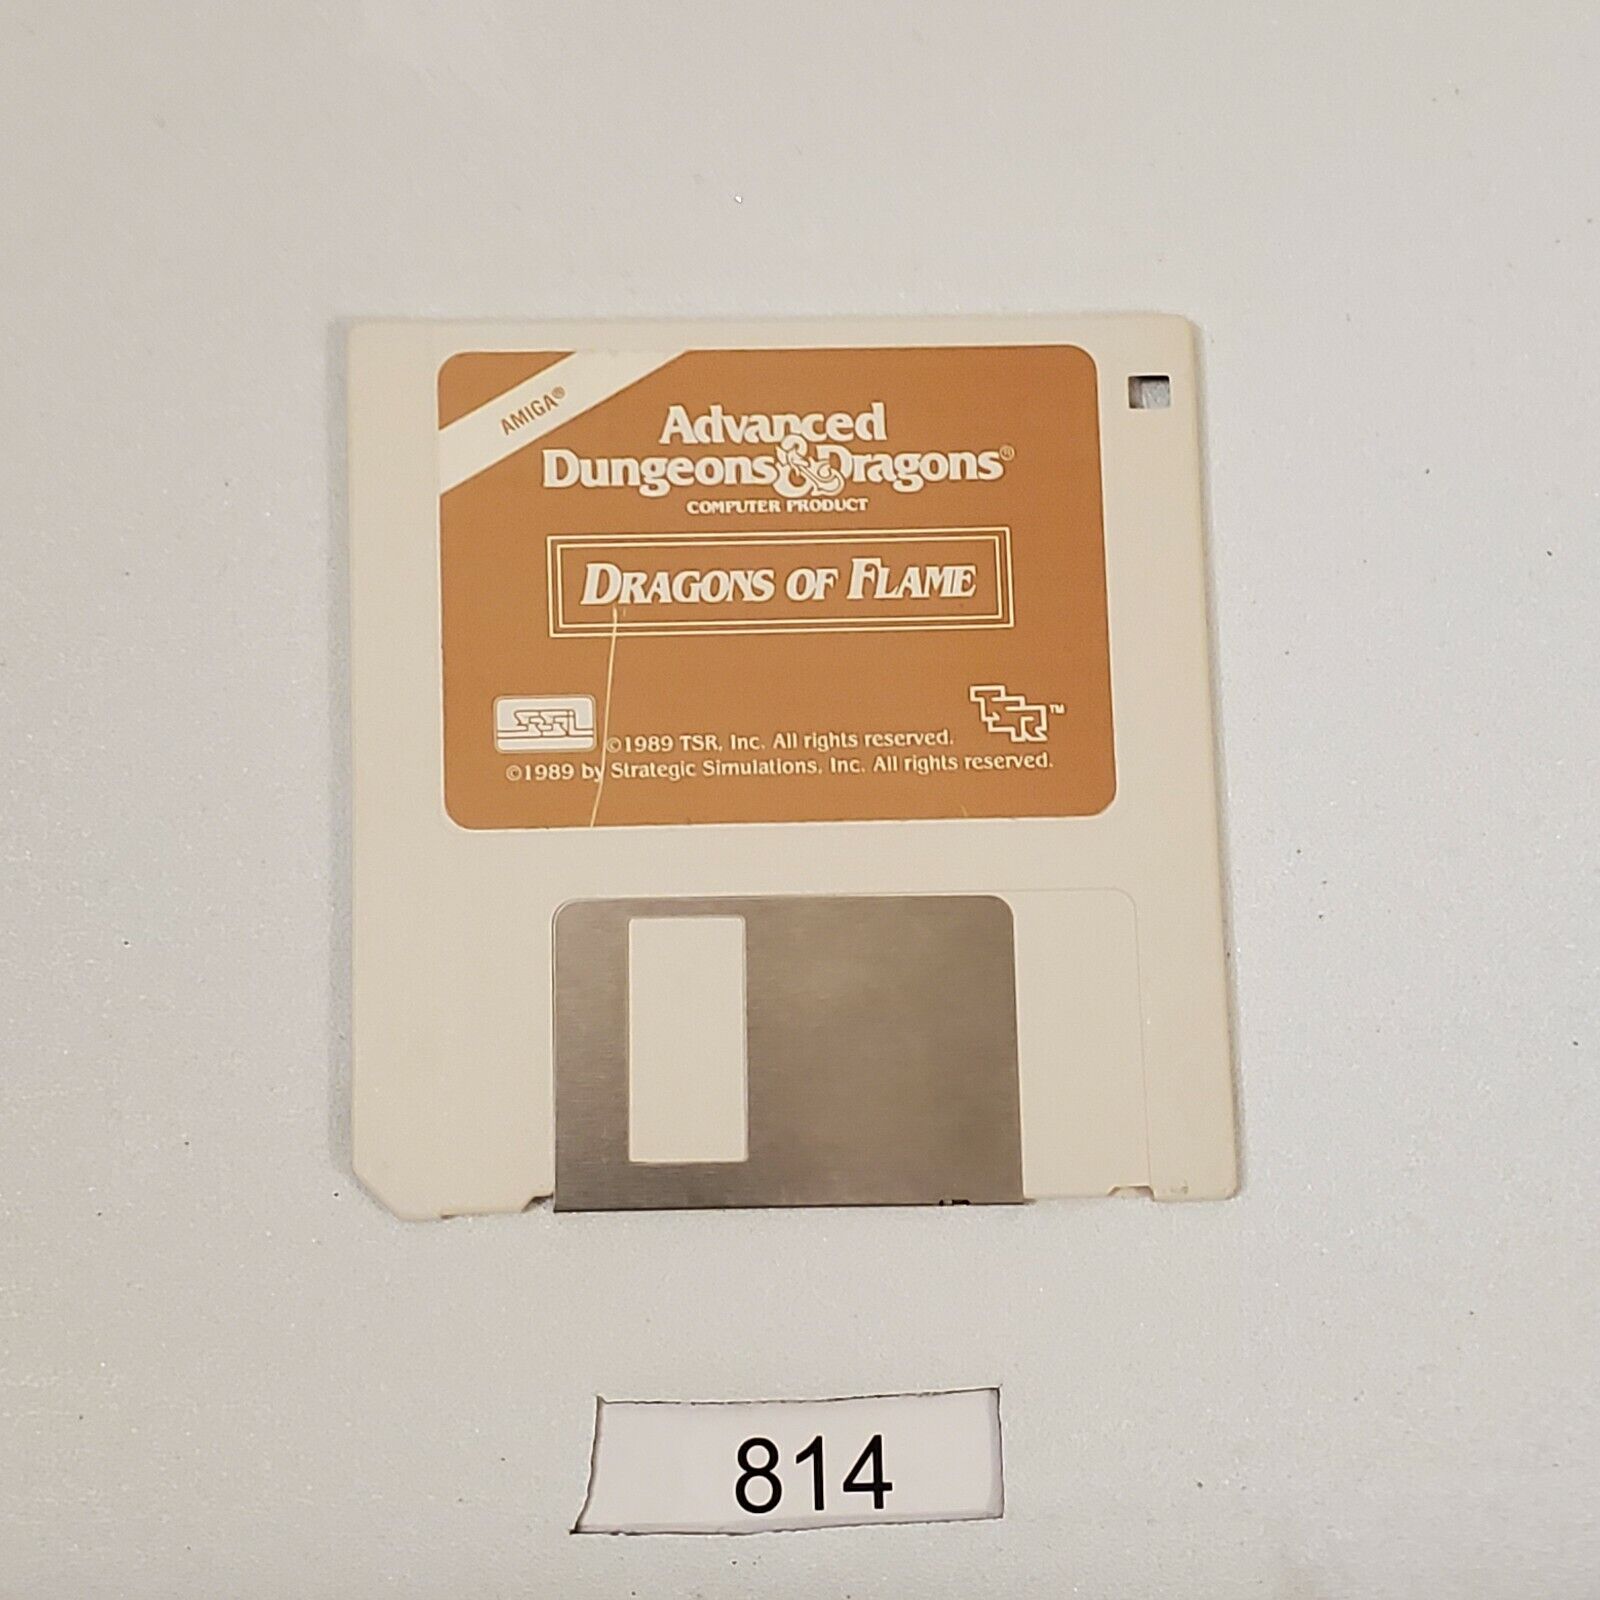 Advanced Dungeons & Dragons Dragons Of Flame Commodore Amiga 3.5 - 1 Disk